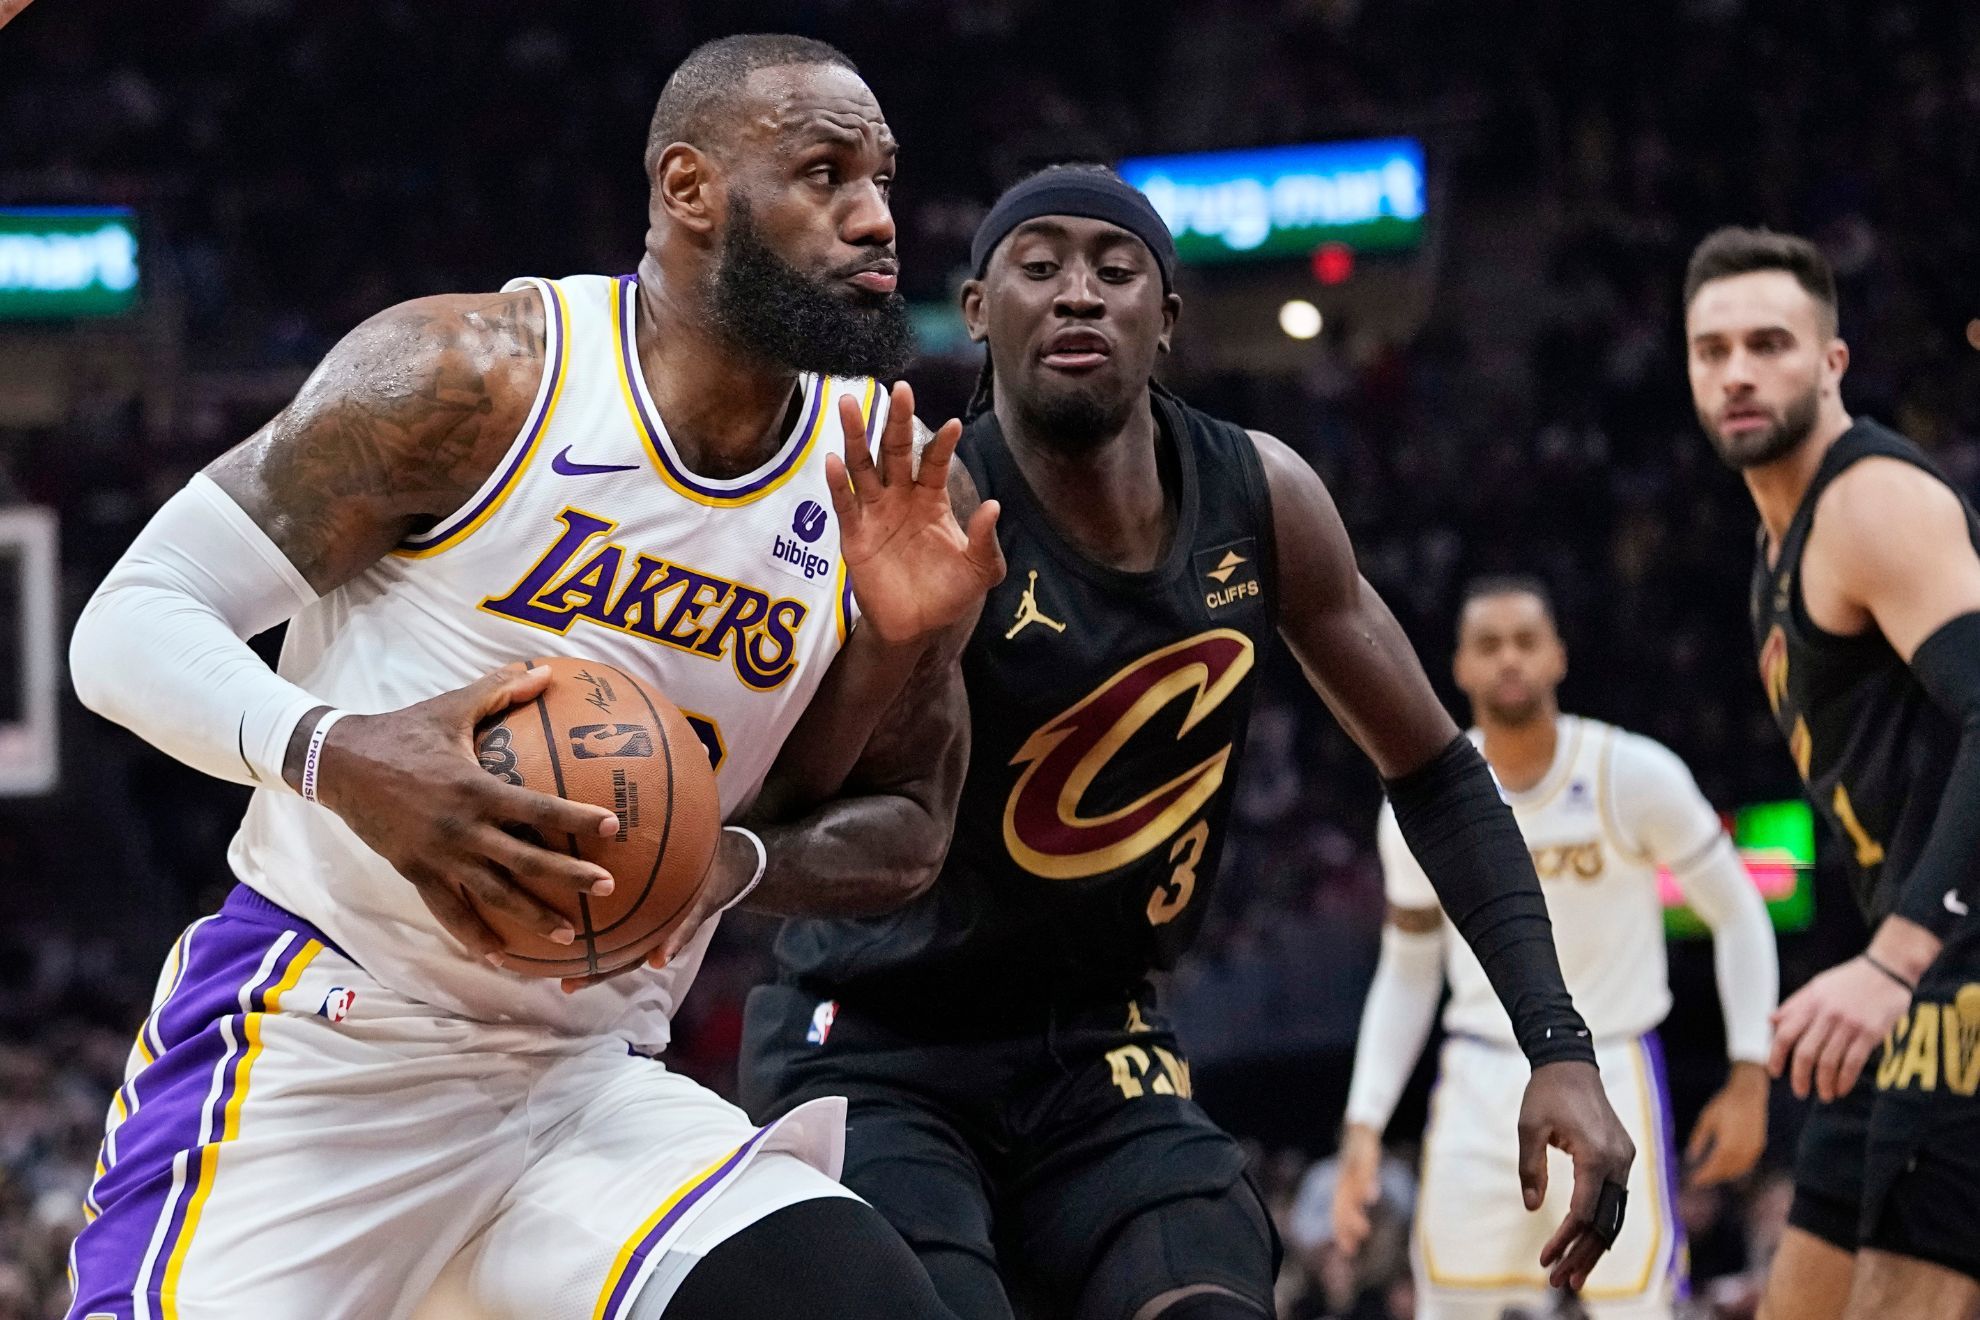 LeBron James leads Lakers to win over Cavaliers as Anthony Davis scores season-high